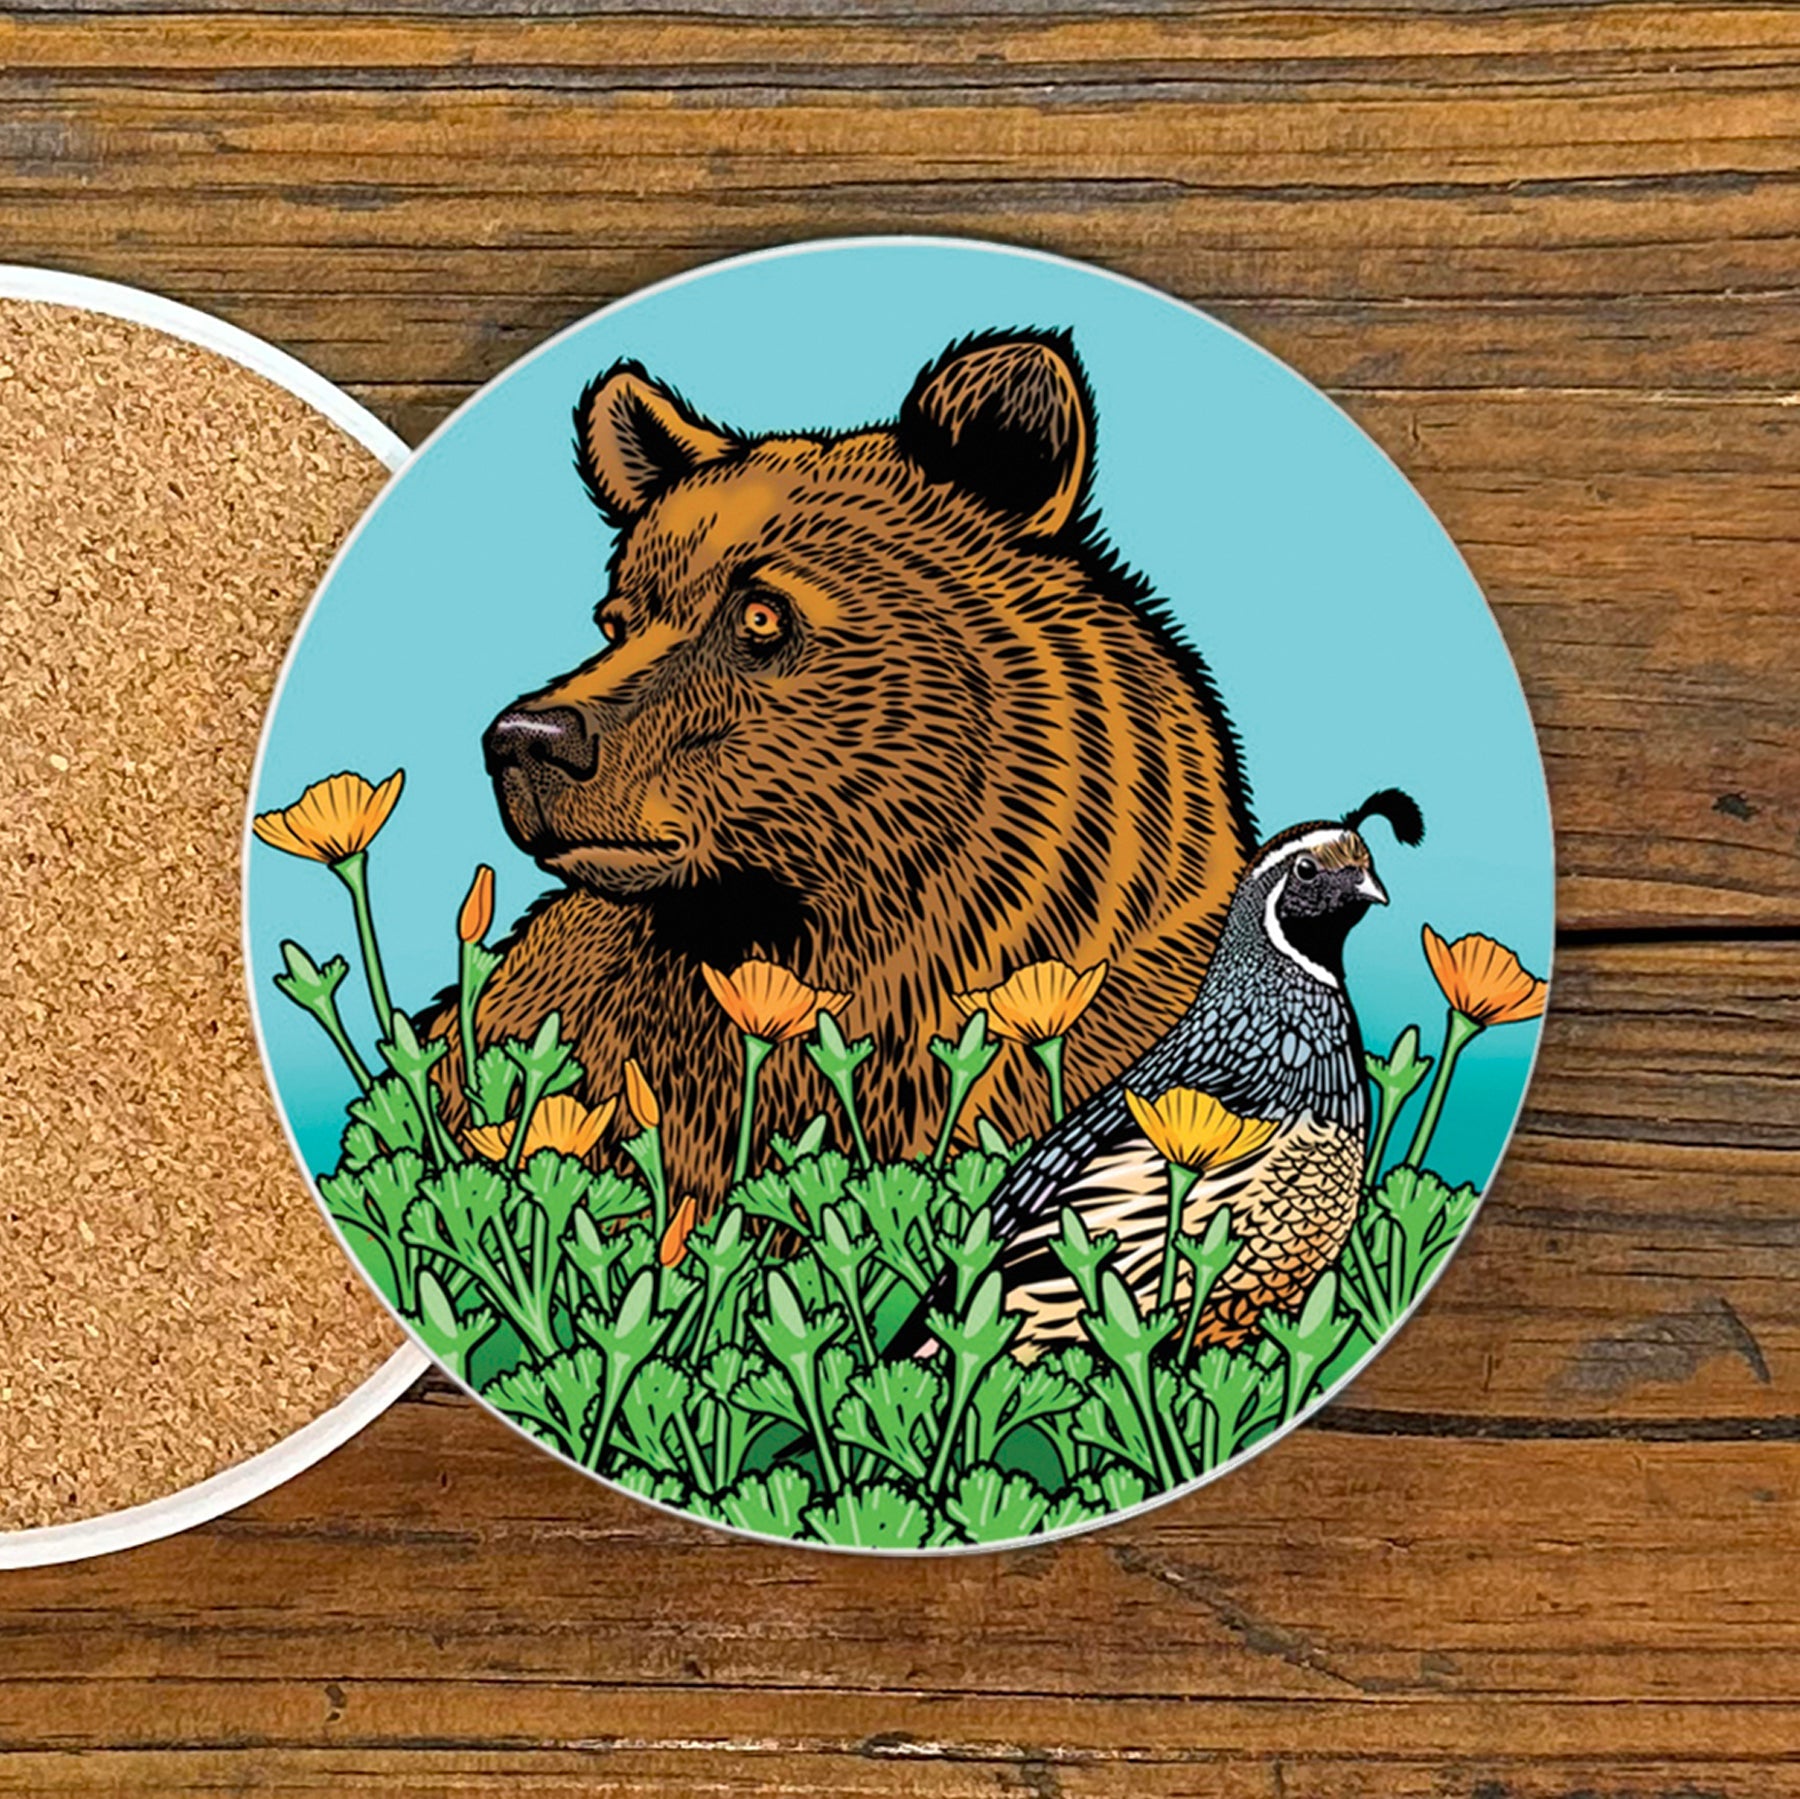 Grizzly Bear Ceramic Coaster - Two Little Fruits